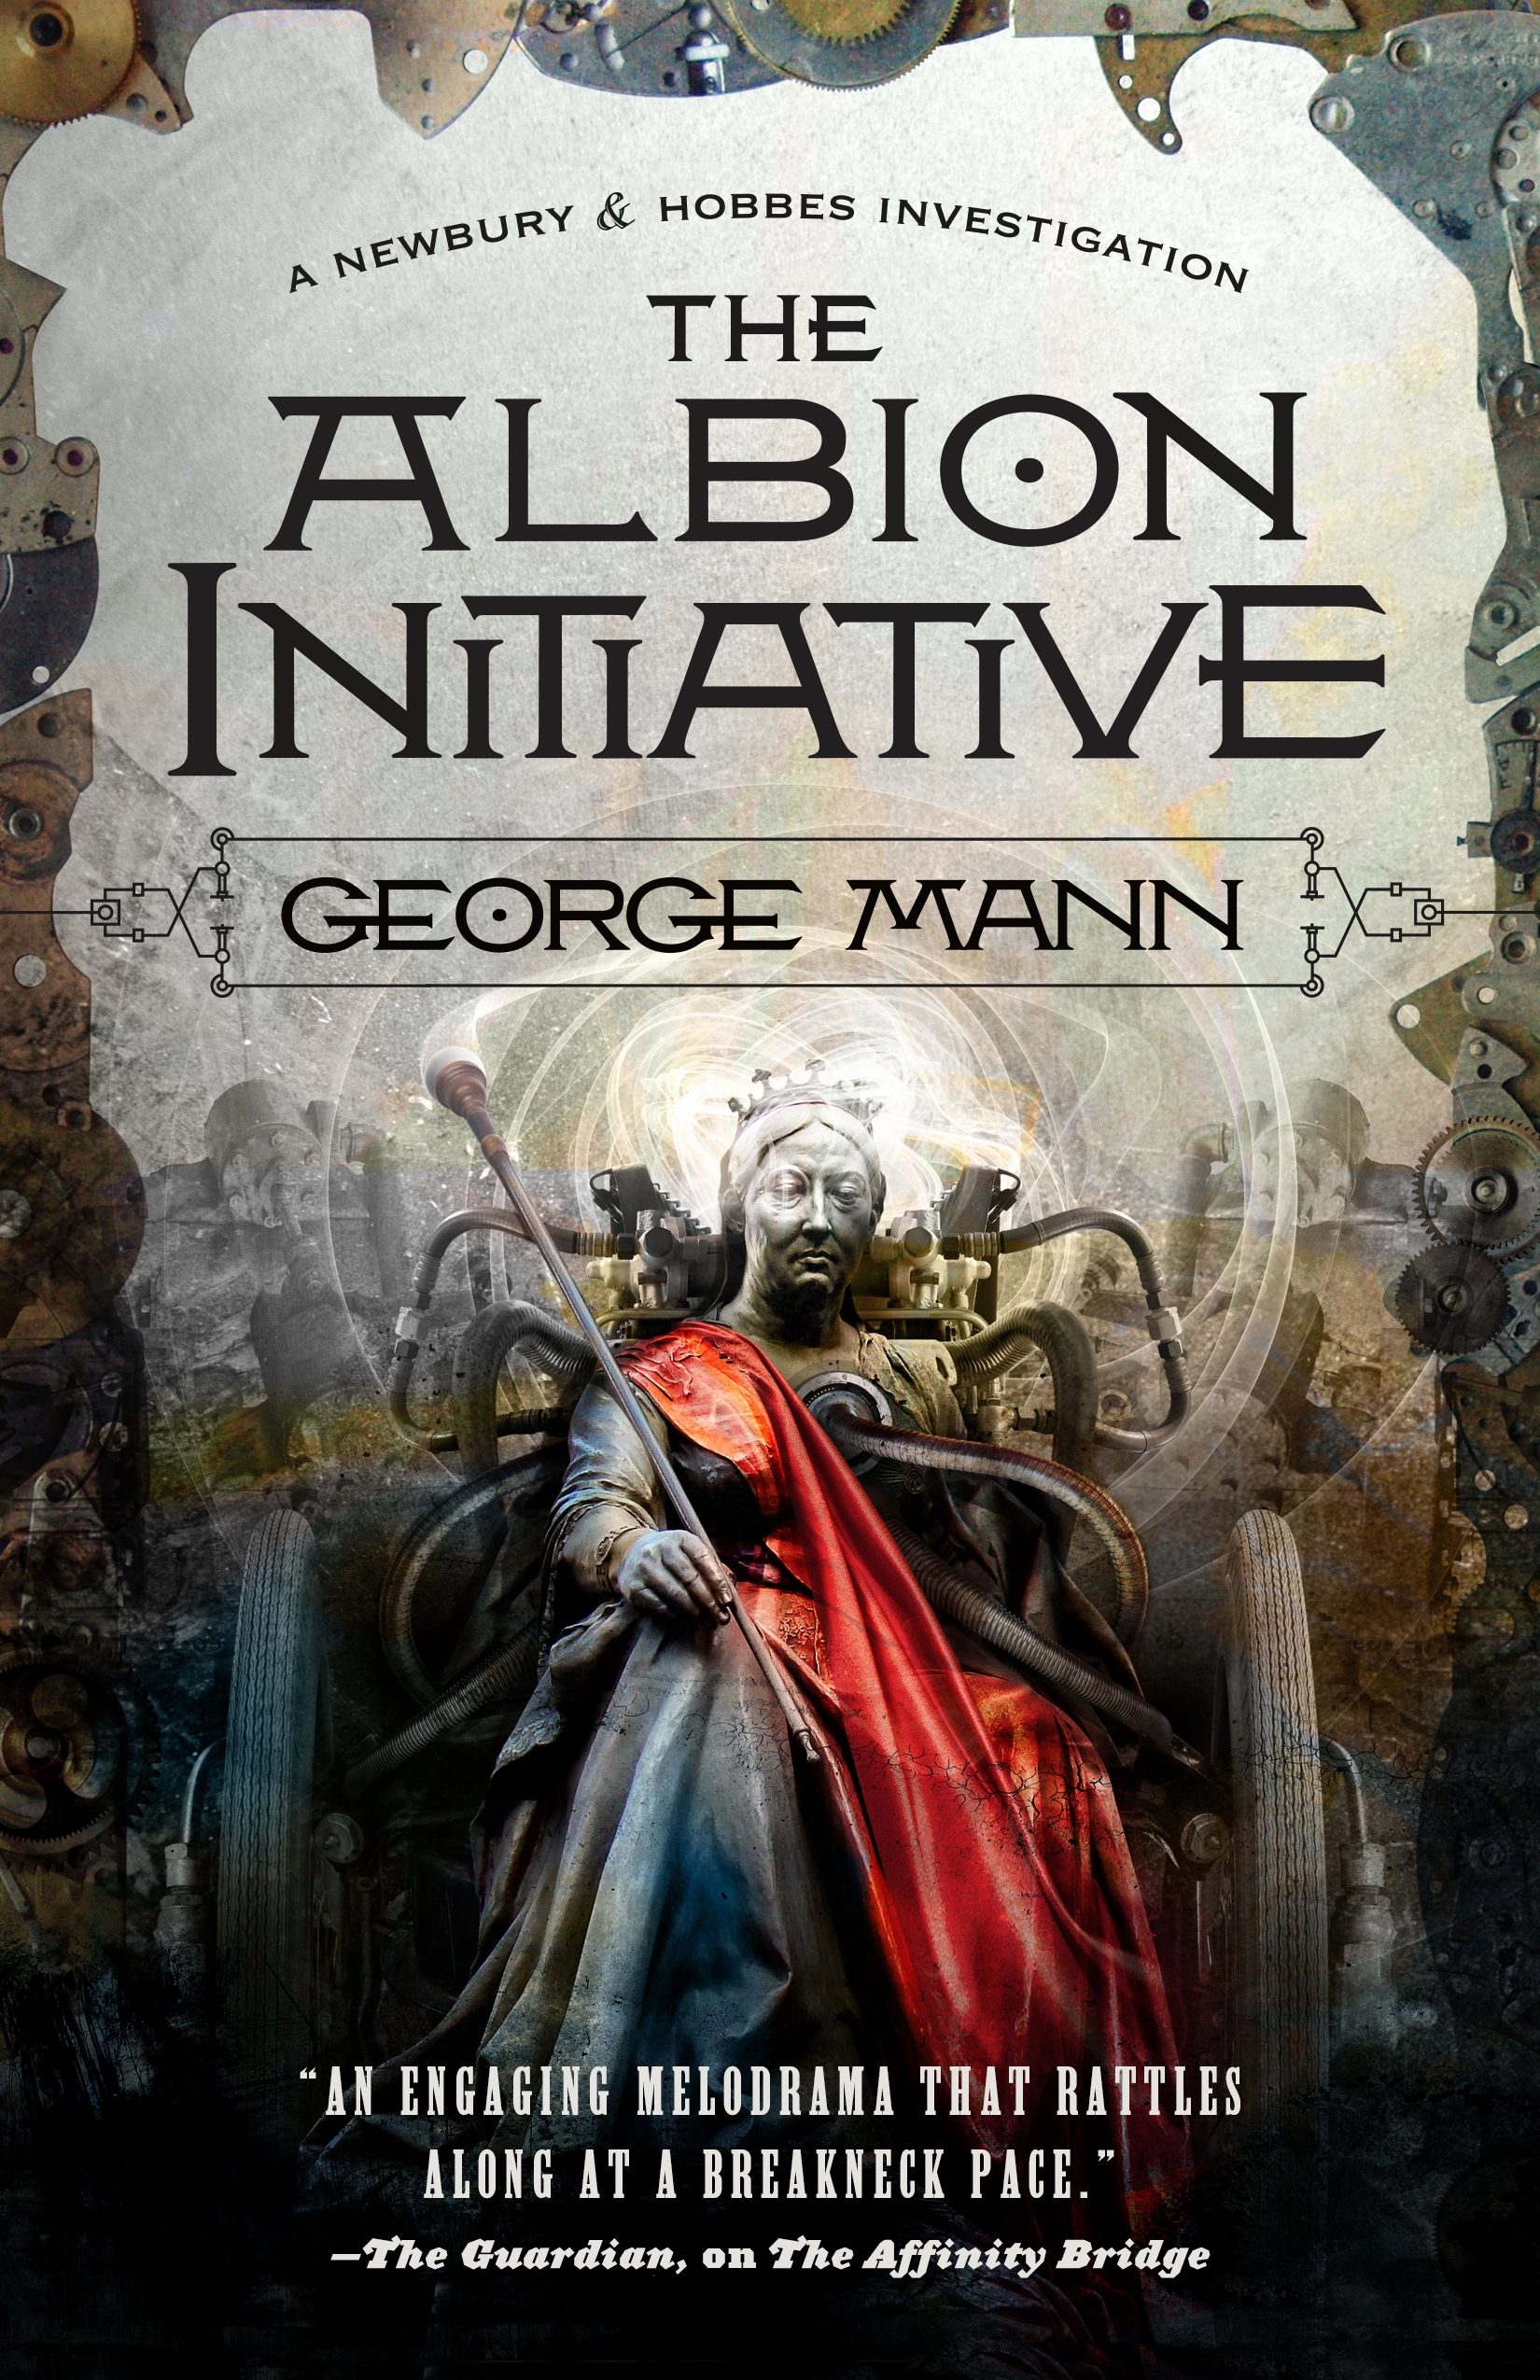 The Albion Initiative : A Newbury & Hobbes Investigation by George Mann